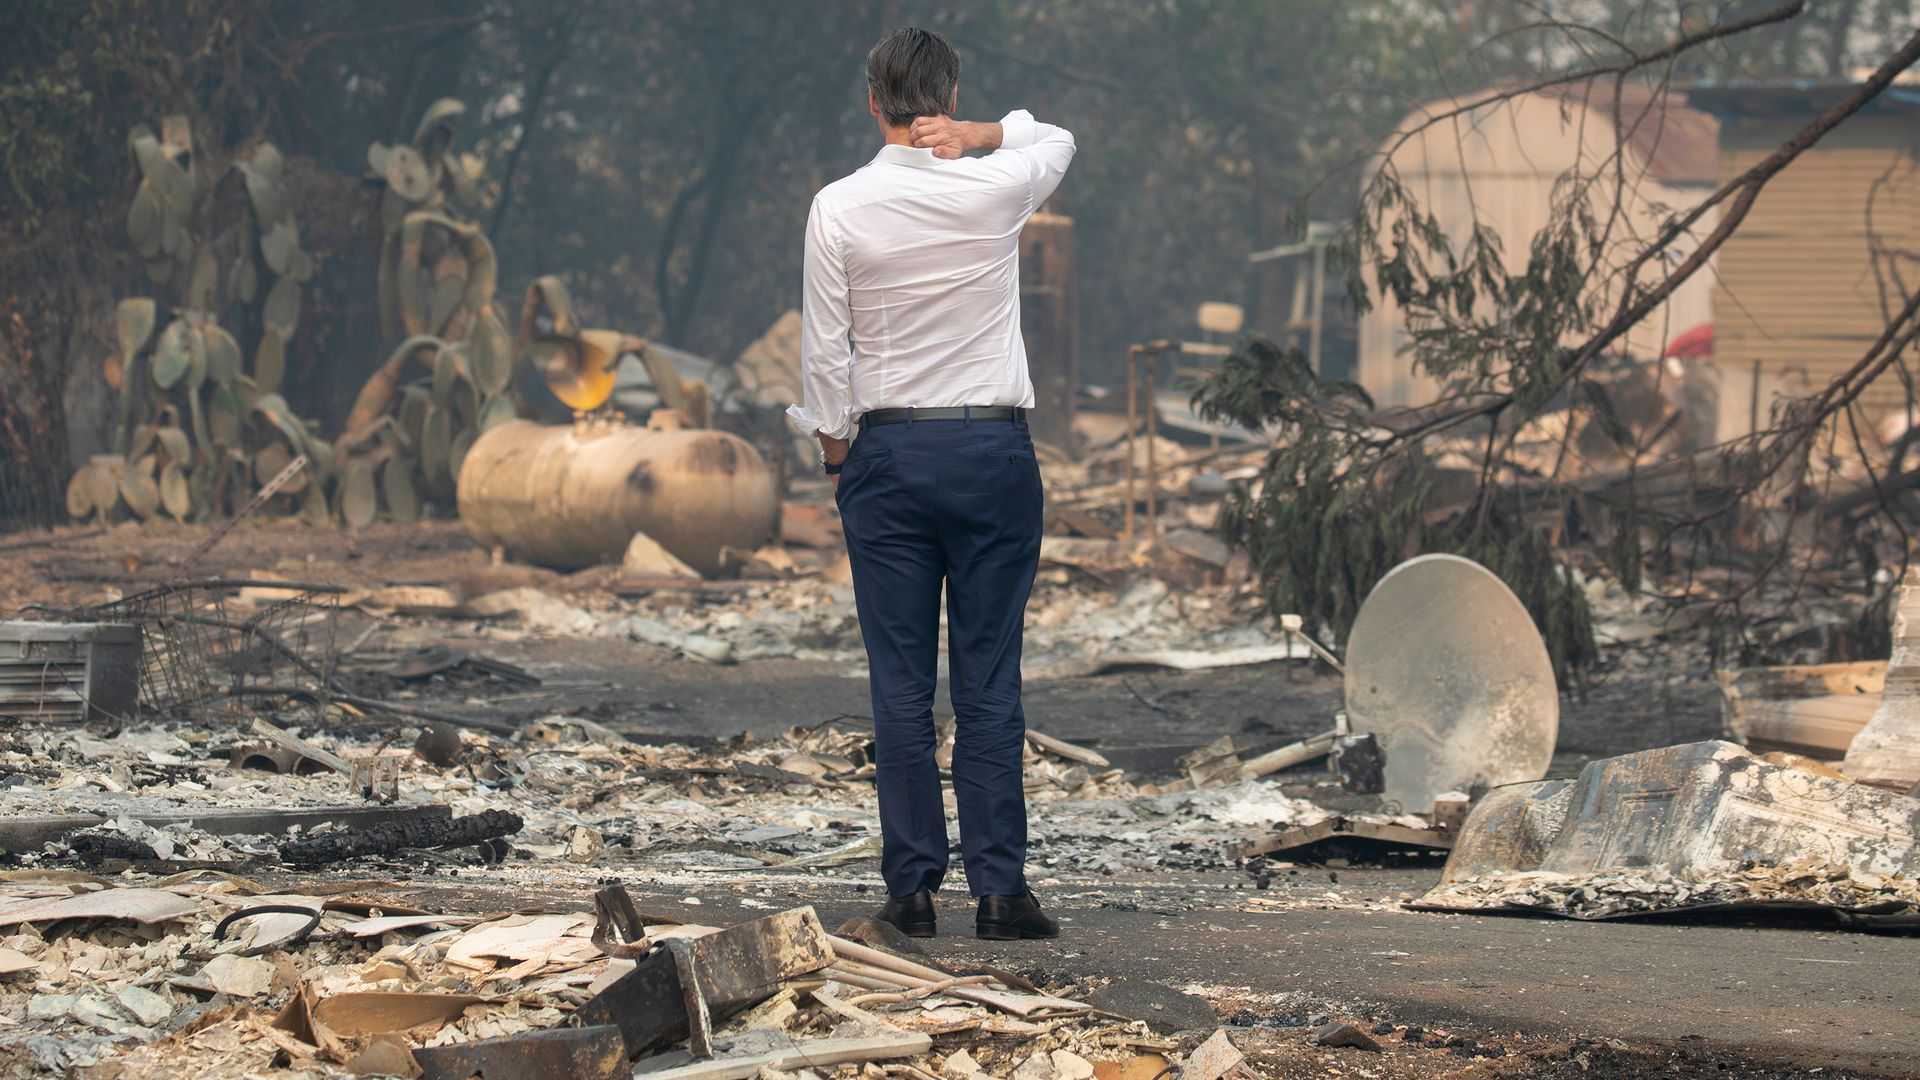 In this image, Gavin Newsom stands in a dress shirt and slacks in the middle of a rubble-filled, burned-out street after a large fire